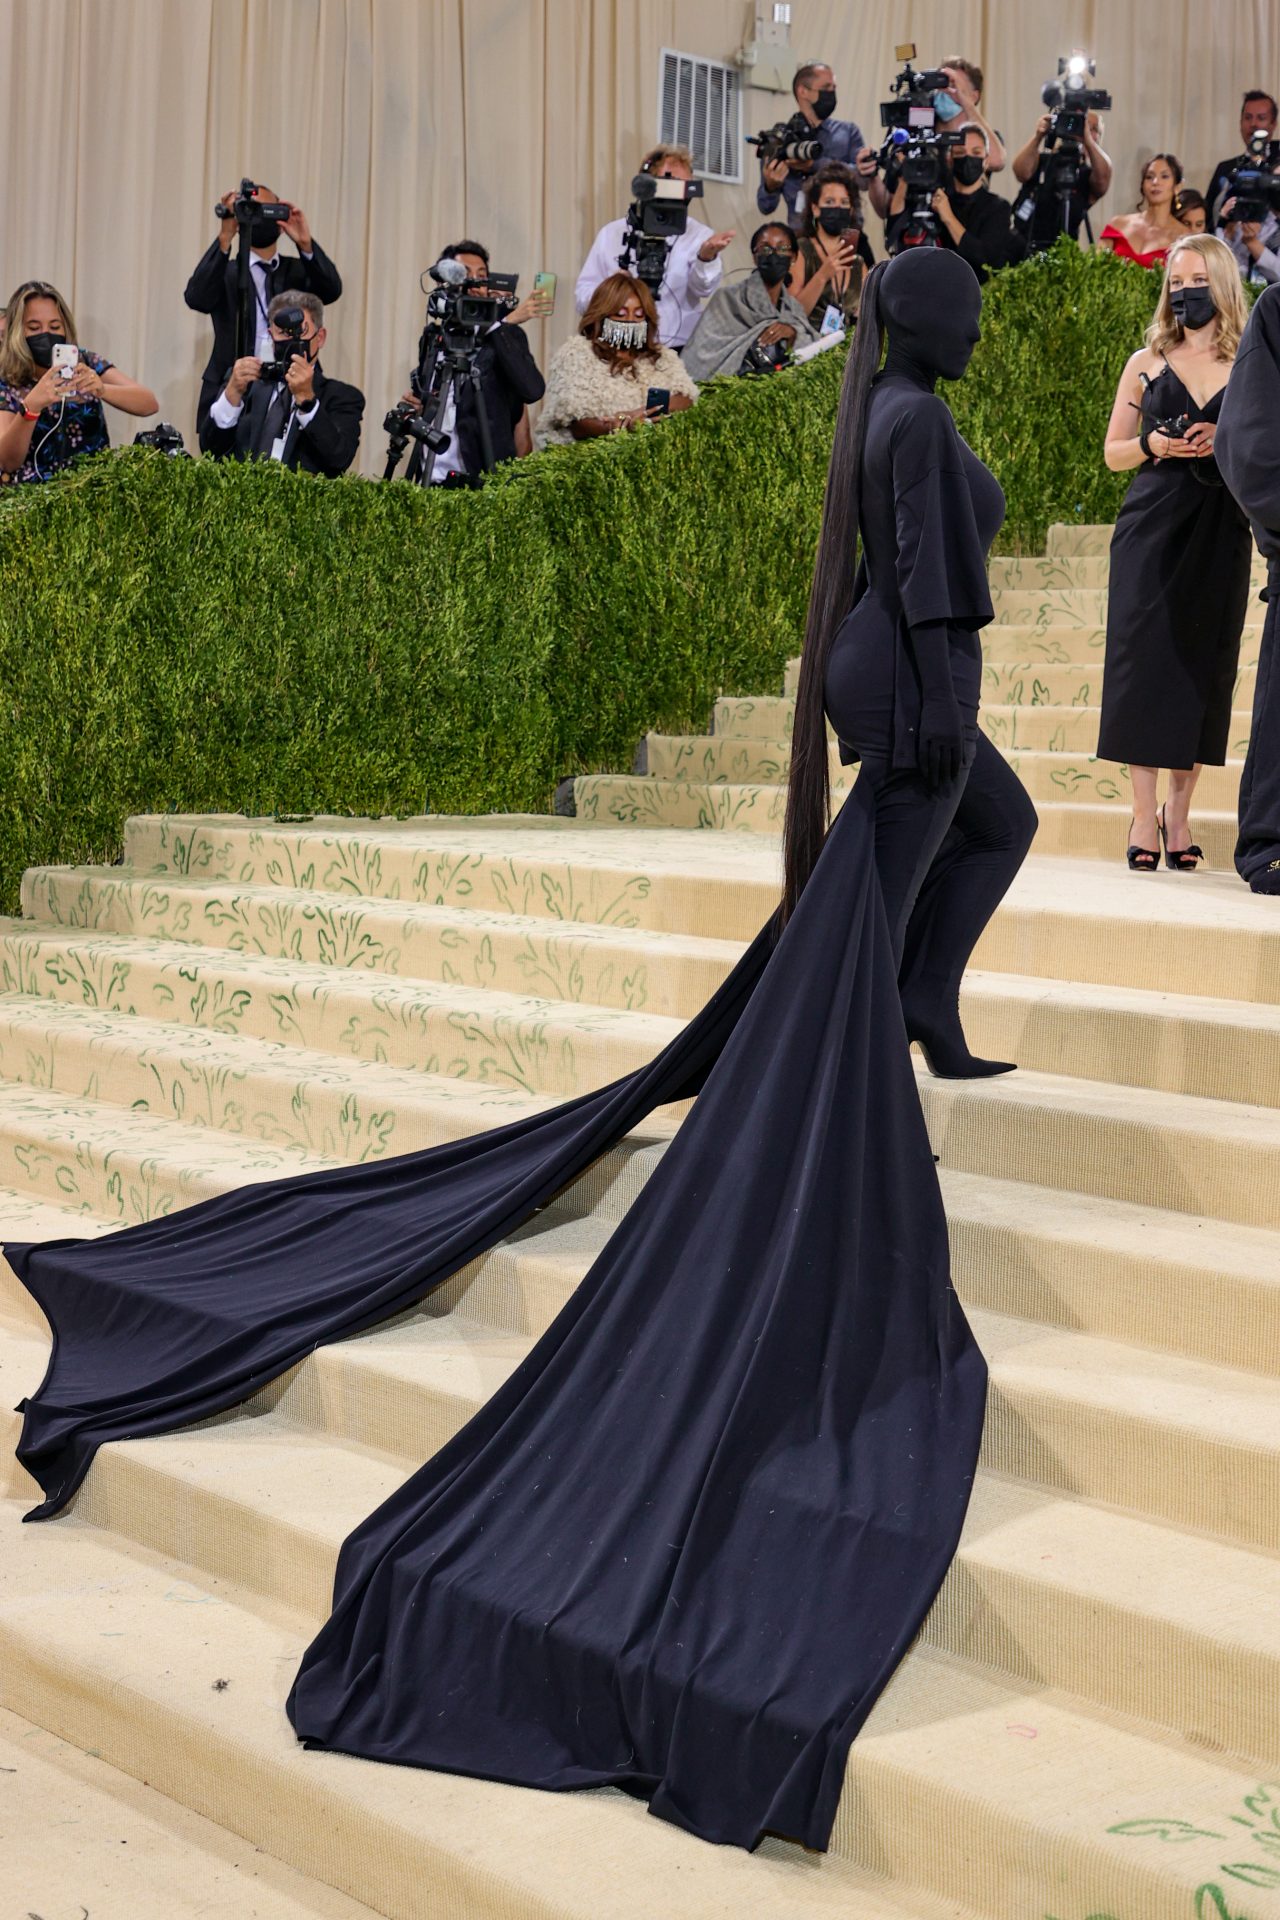 NEW YORK, NEW YORK - SEPTEMBER 13: Kim Kardashian attends The 2021 Met Gala Celebrating In America: A Lexicon Of Fashion at Metropolitan Museum of Art on September 13, 2021 in New York City. (Photo by Theo Wargo/Getty Images)